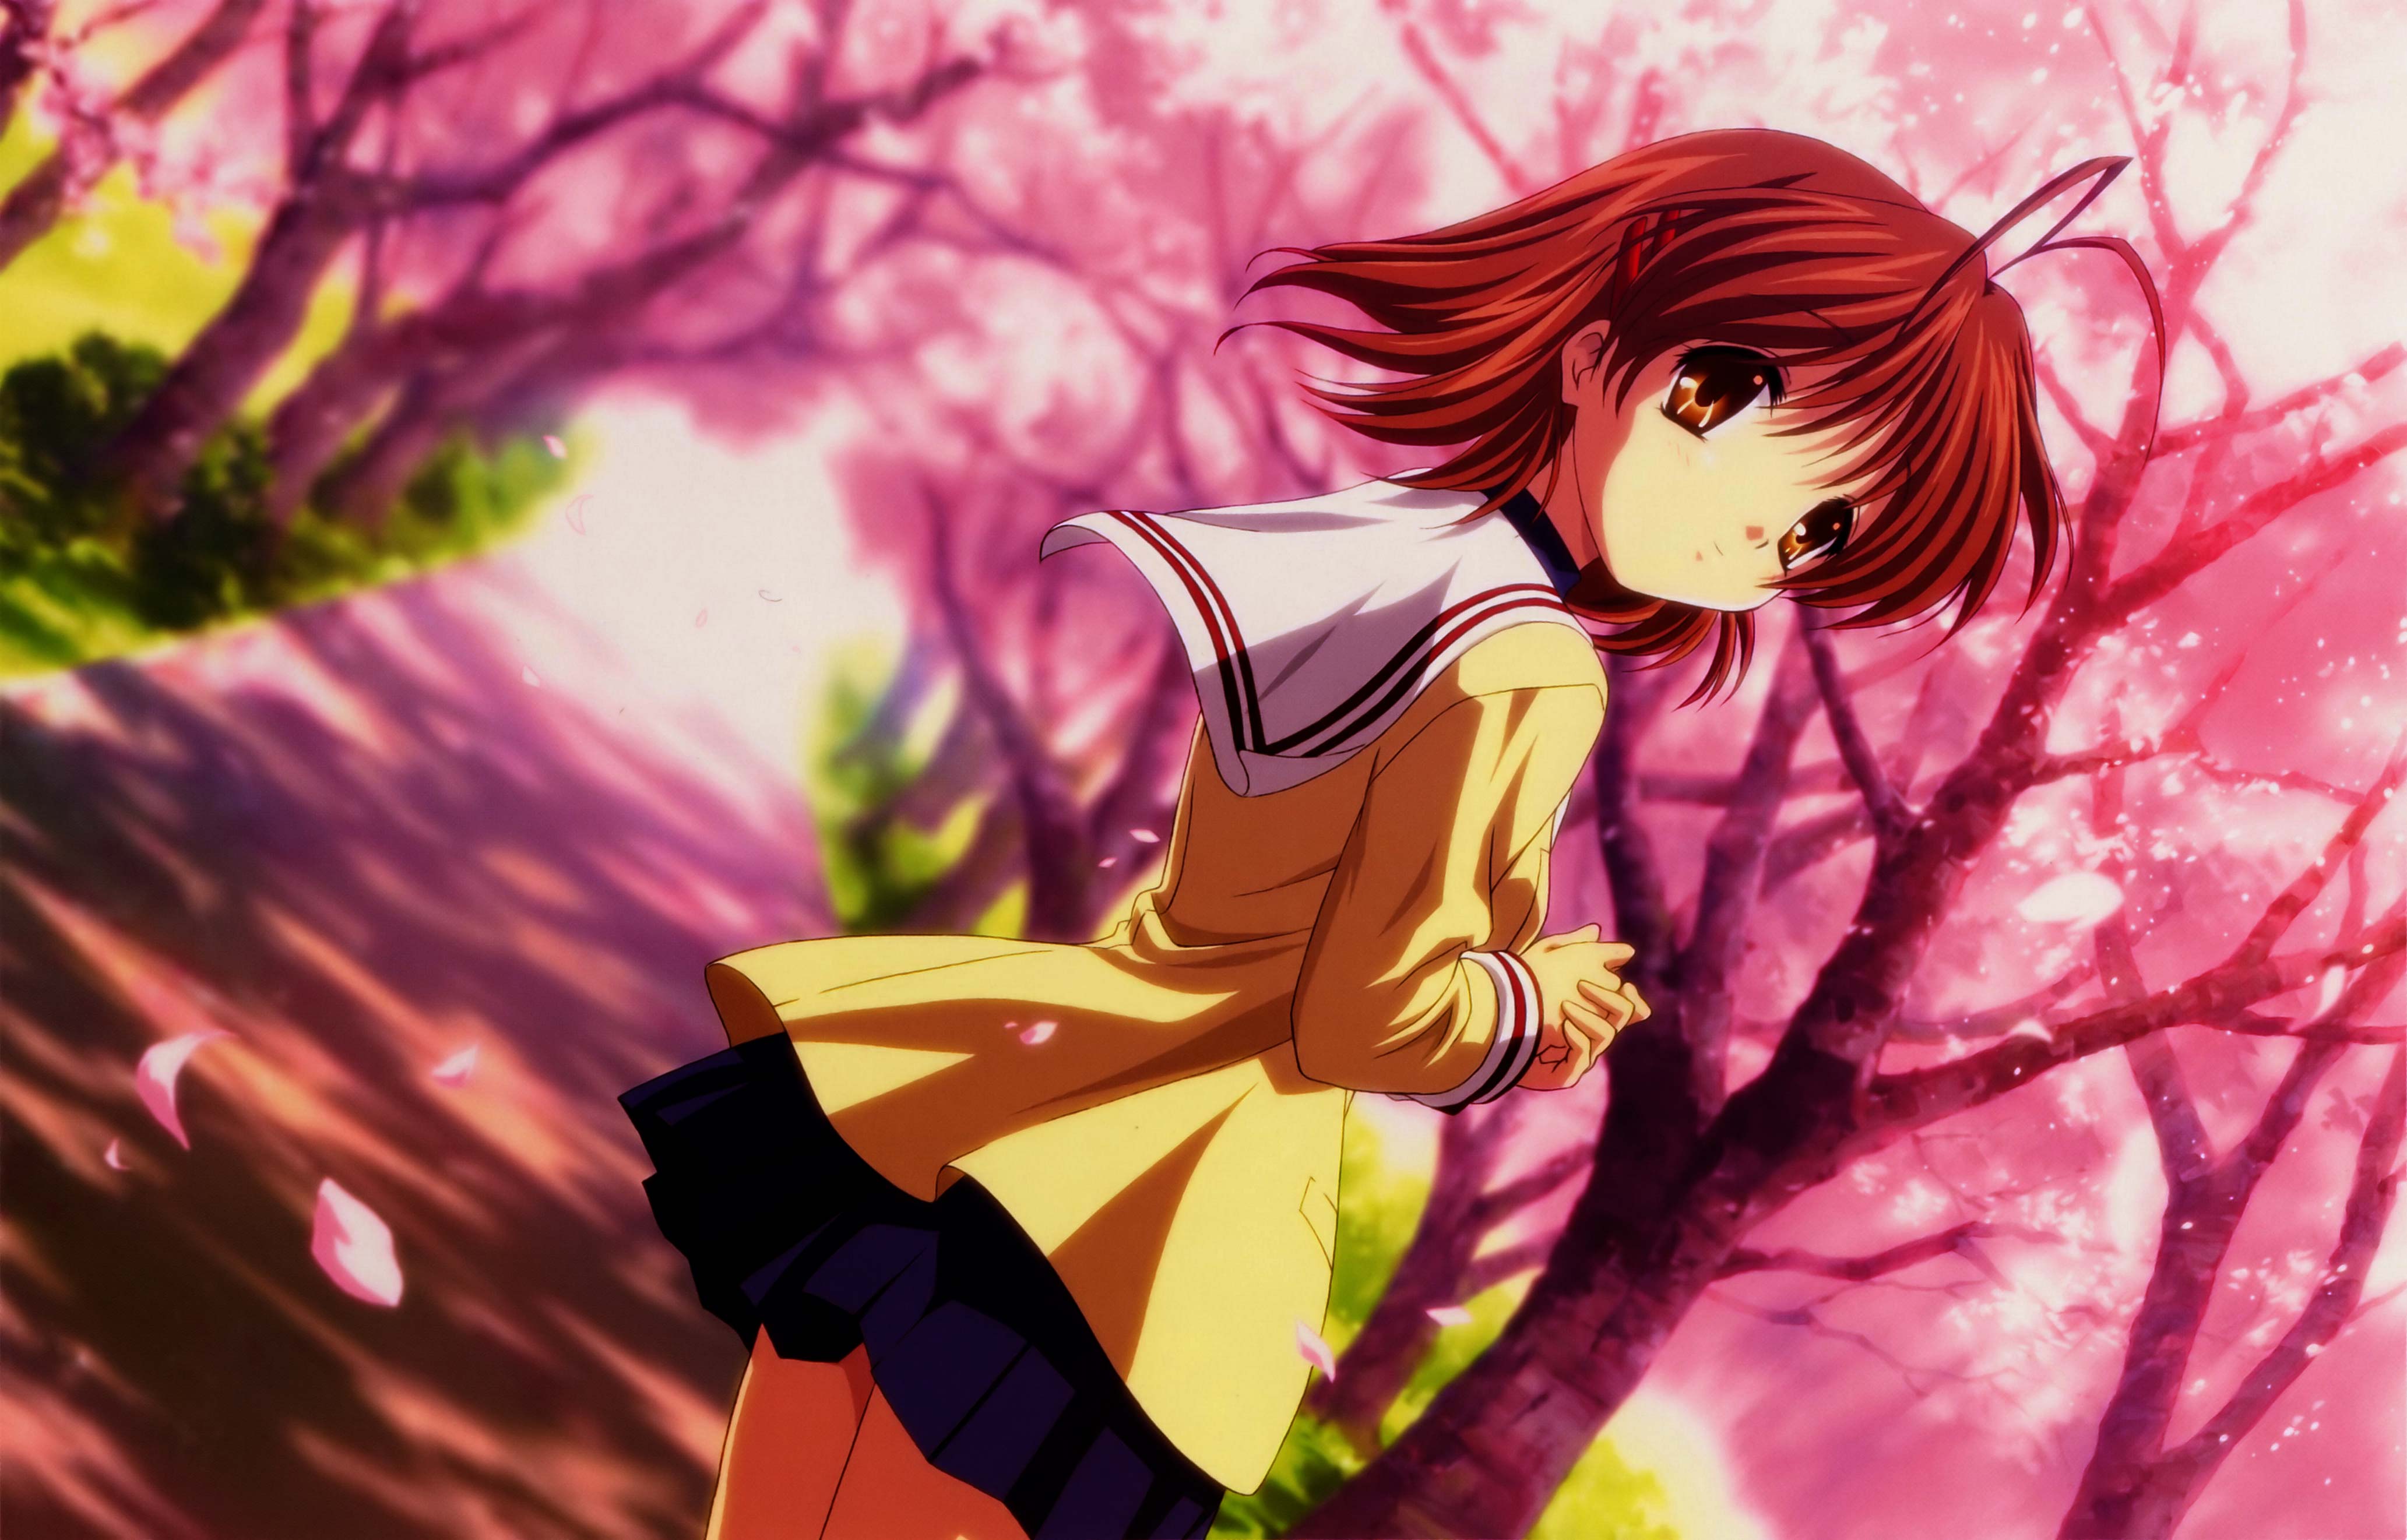  Anime wallpapers The Quality Ultra HD 4k Wallpaper for your High 4130x2643